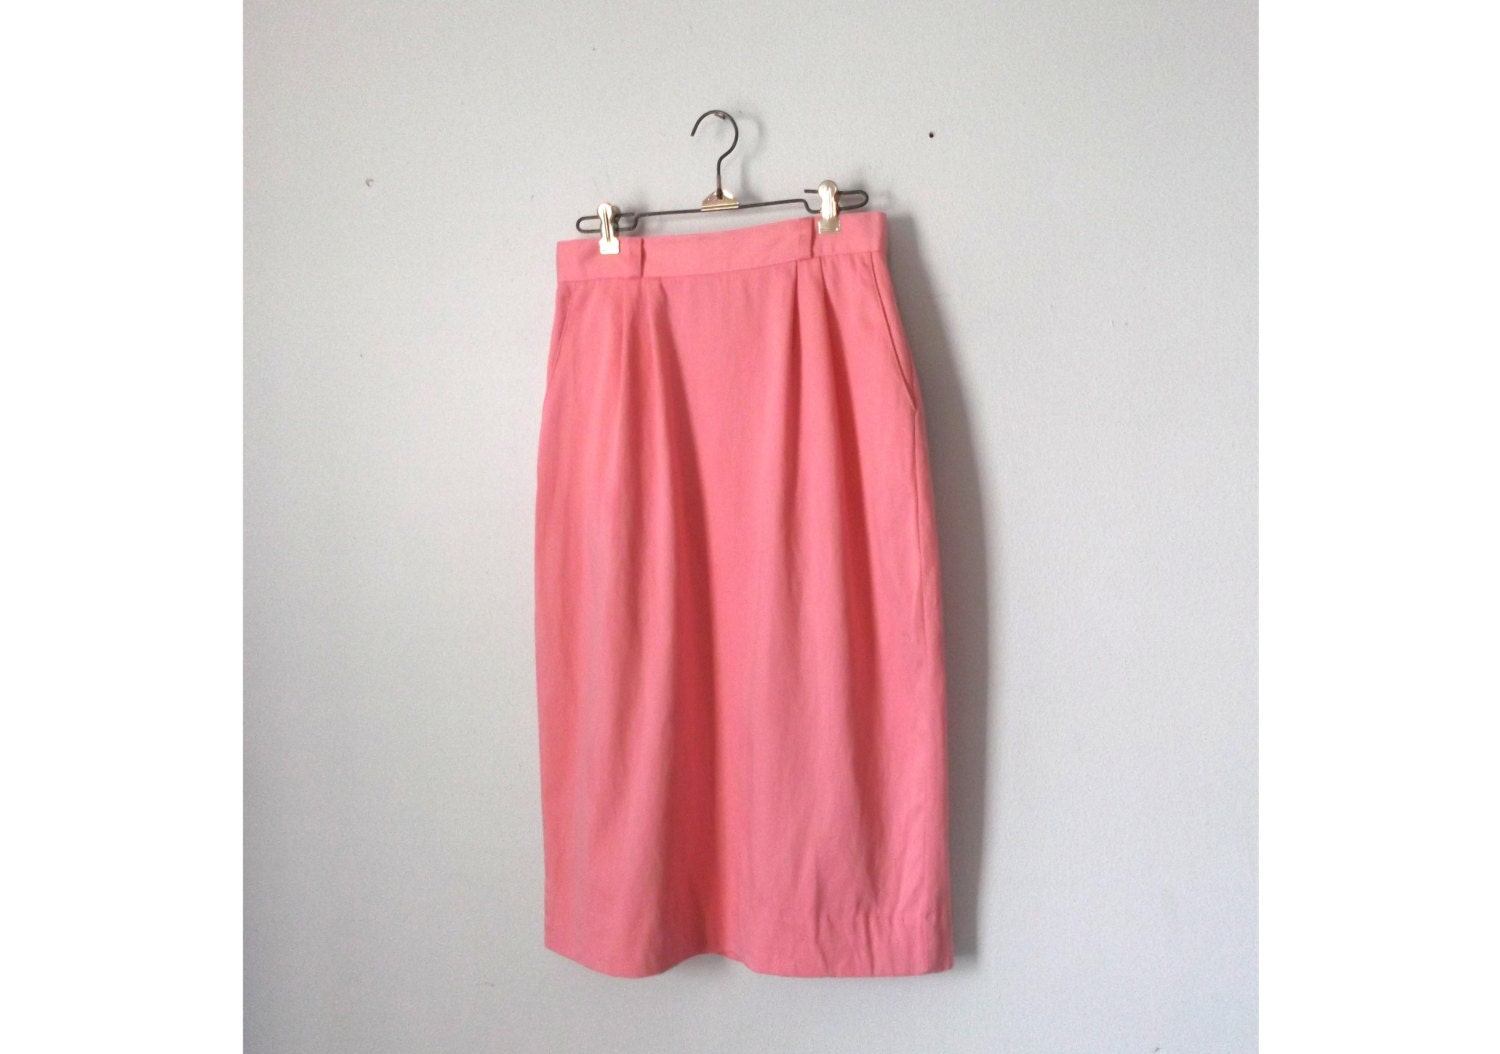 Vintage 1980s Pencil Skirt / 80s Bubble Gum Pink by billowyvintage